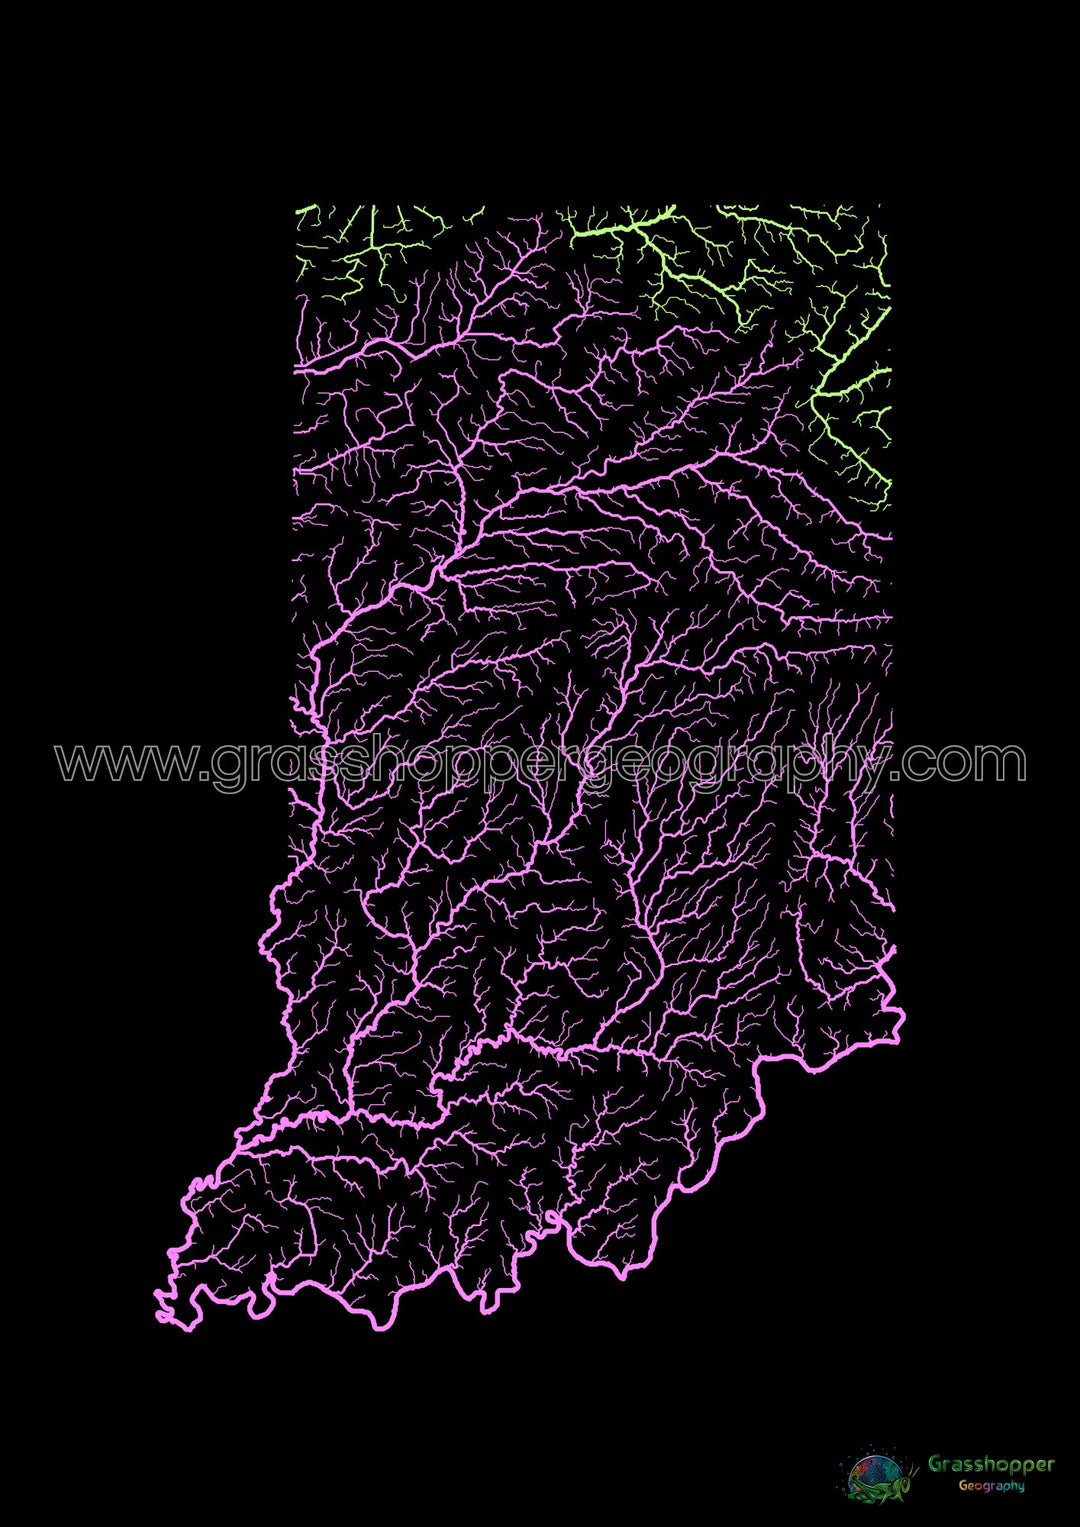 River basin map of Indiana, pastel colours on black - Fine Art Print